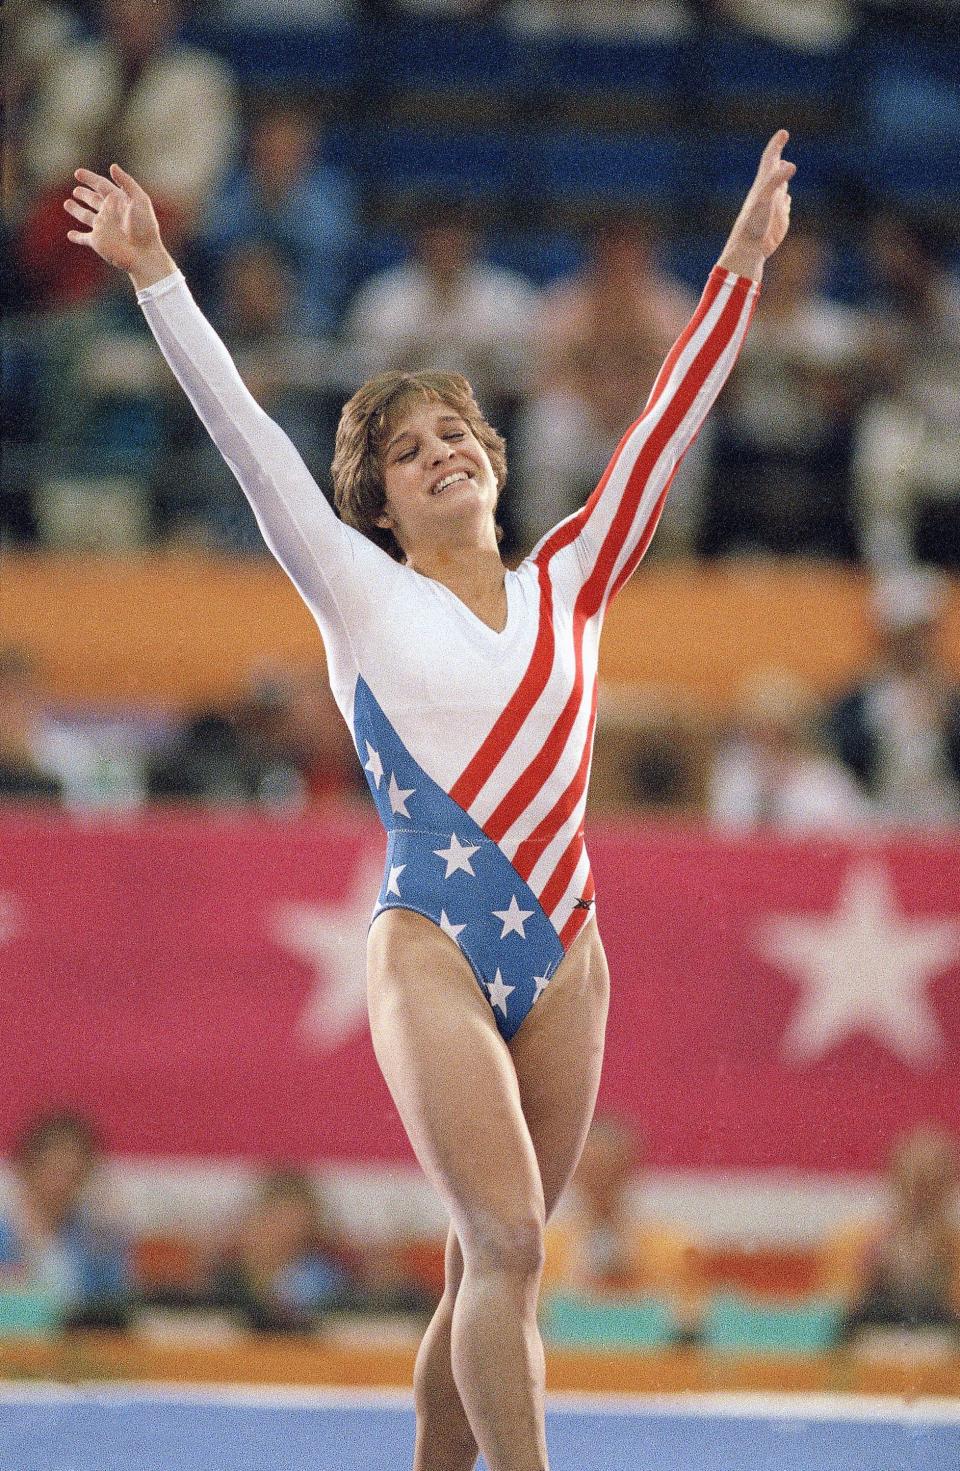 FILE - In this 1984 file photo, Mary Lou Retton celebrates her balance beam score at the 1984 Olympic Games in Los Angeles. (AP Photo/Lionel Cironneau, File)